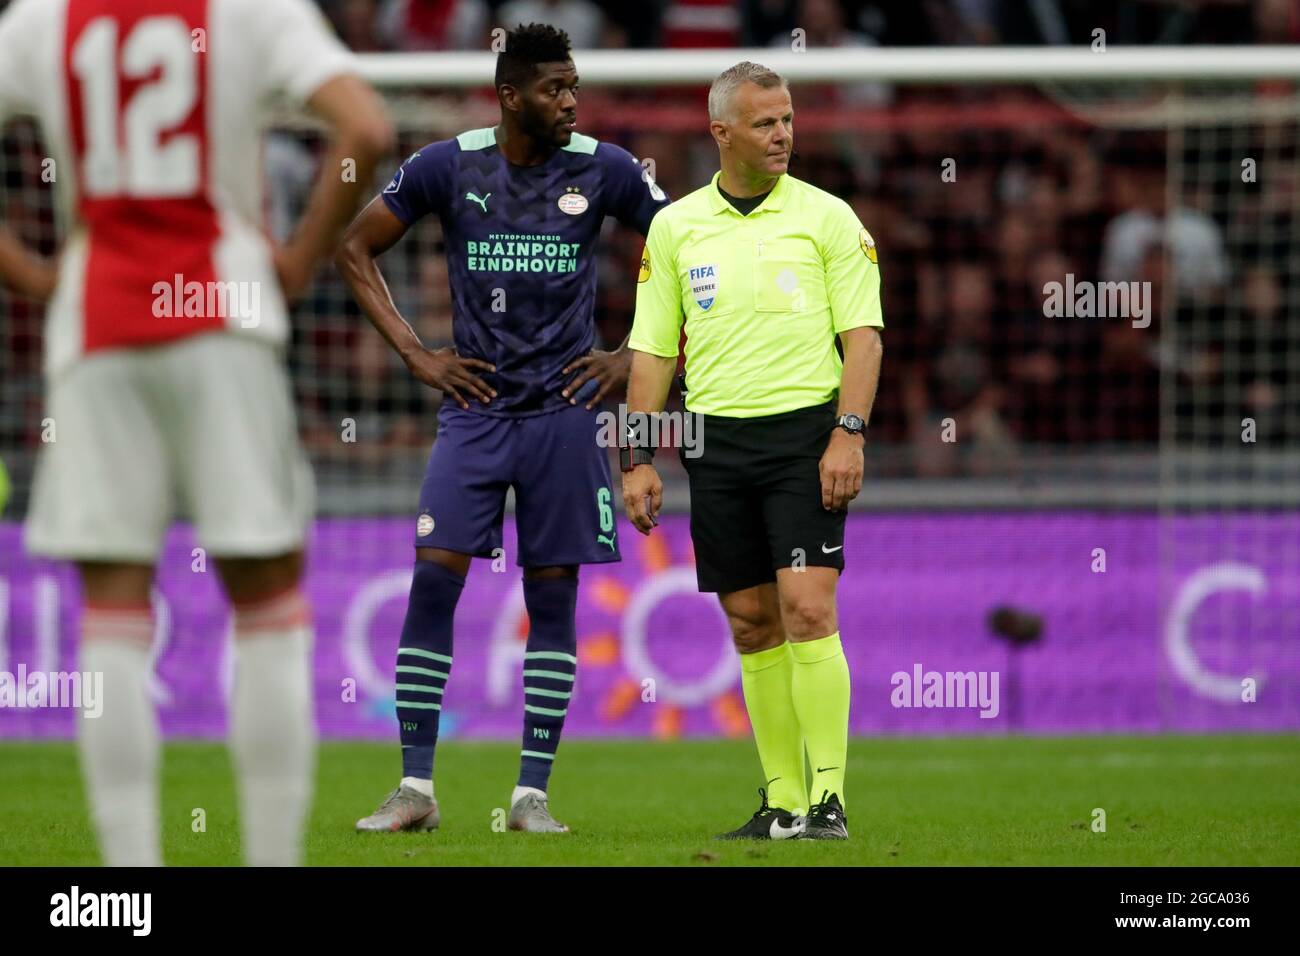 AMSTERDAM, NETHERLANDS - AUGUST 7: referee Bjorn Kuipers looking at the VAR during the Johan Cruijff Schaal between Ajax PSV at Johan Cruijff Arena on August 7, 2021 in Amsterdam,